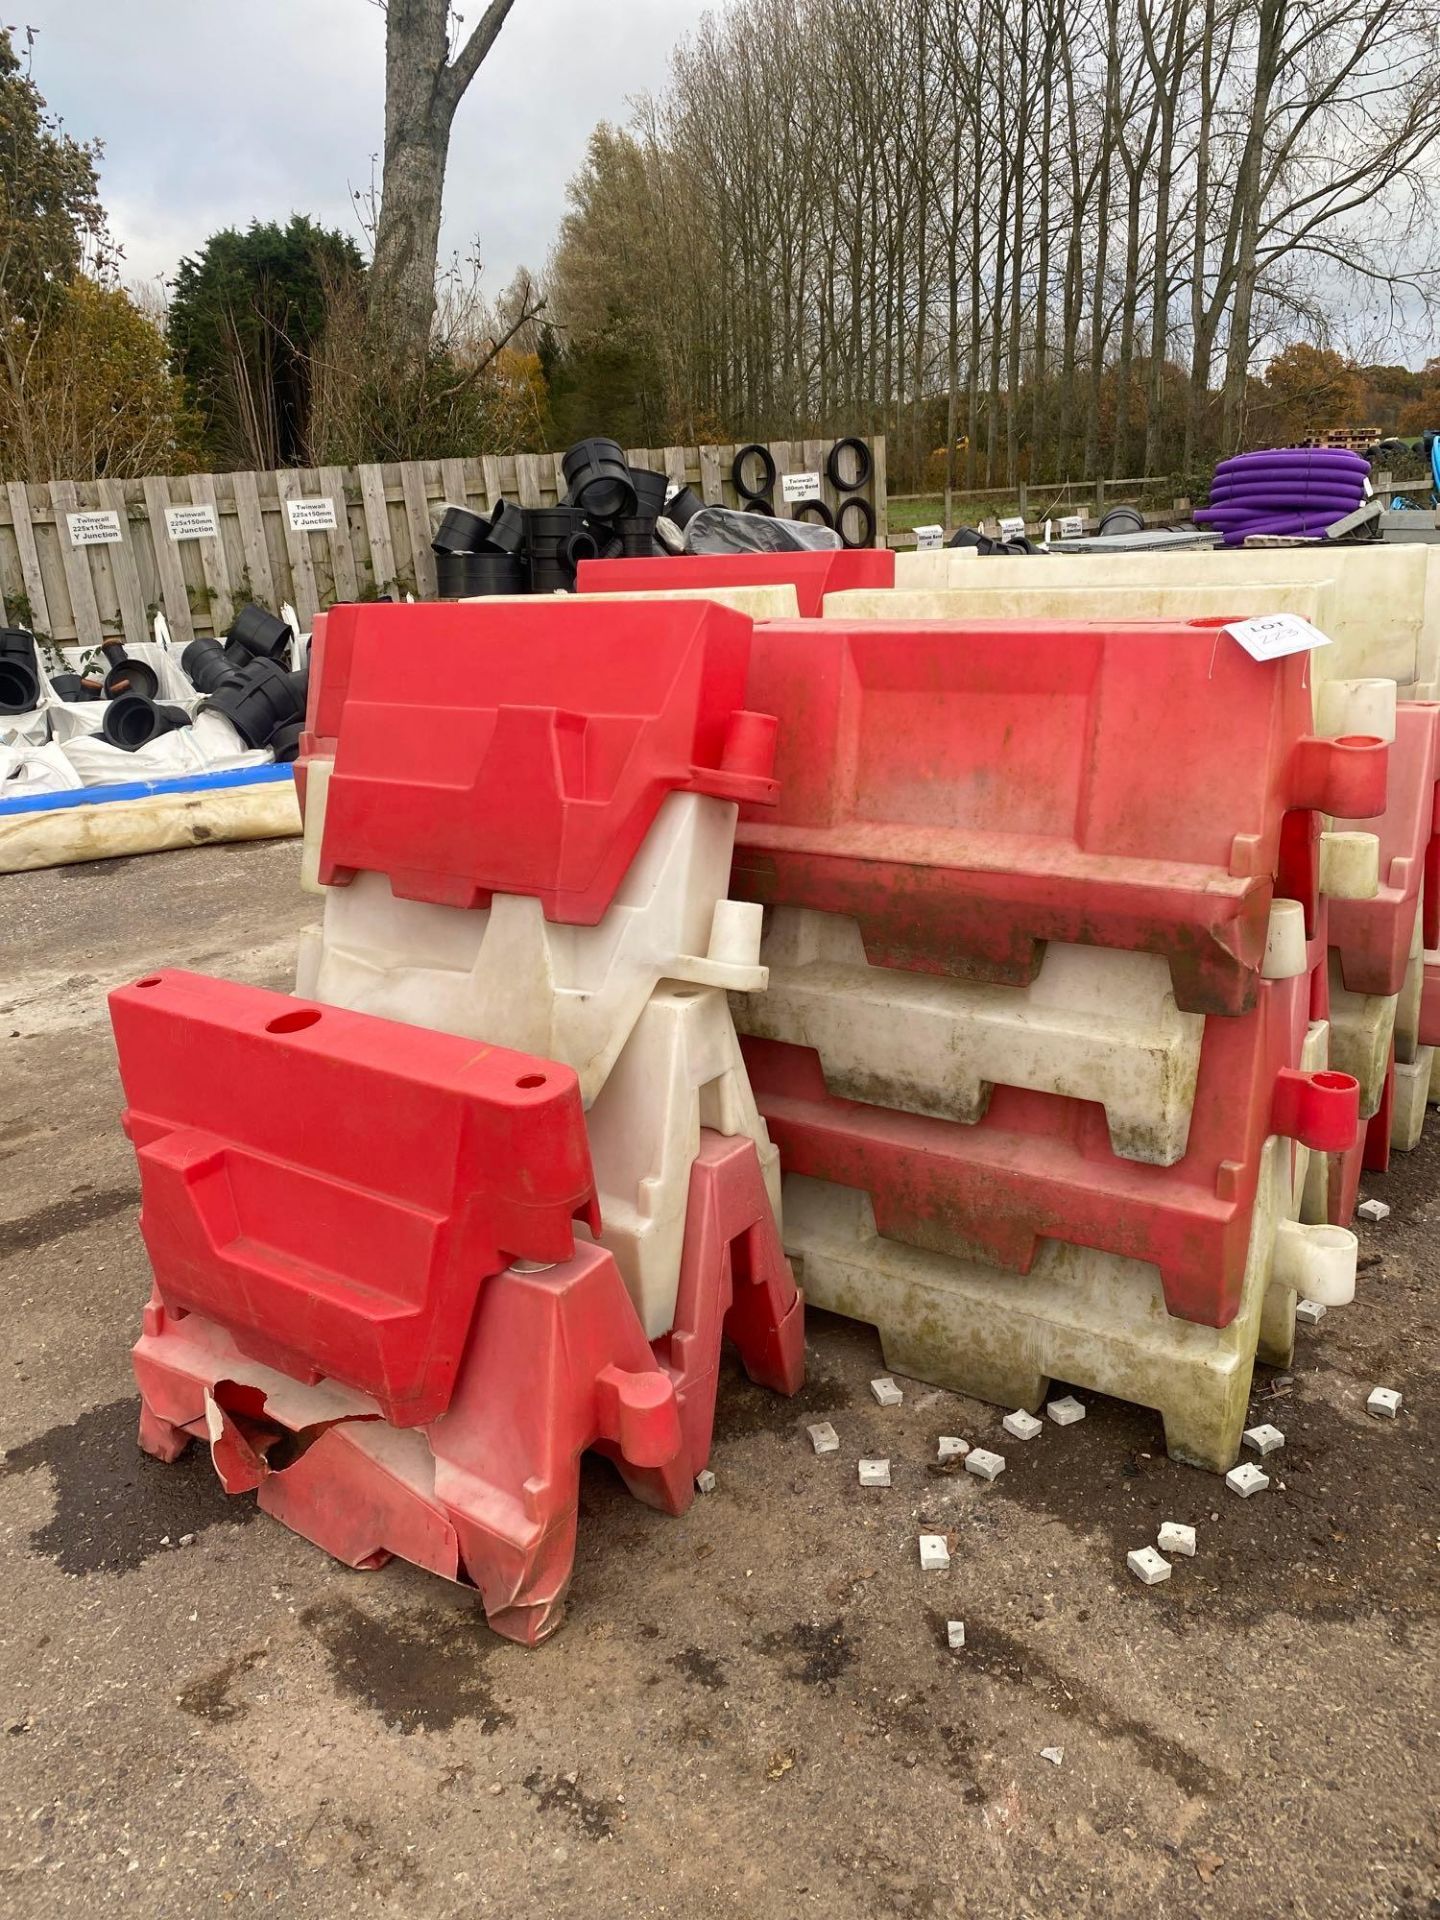 38 Red and white road barriers